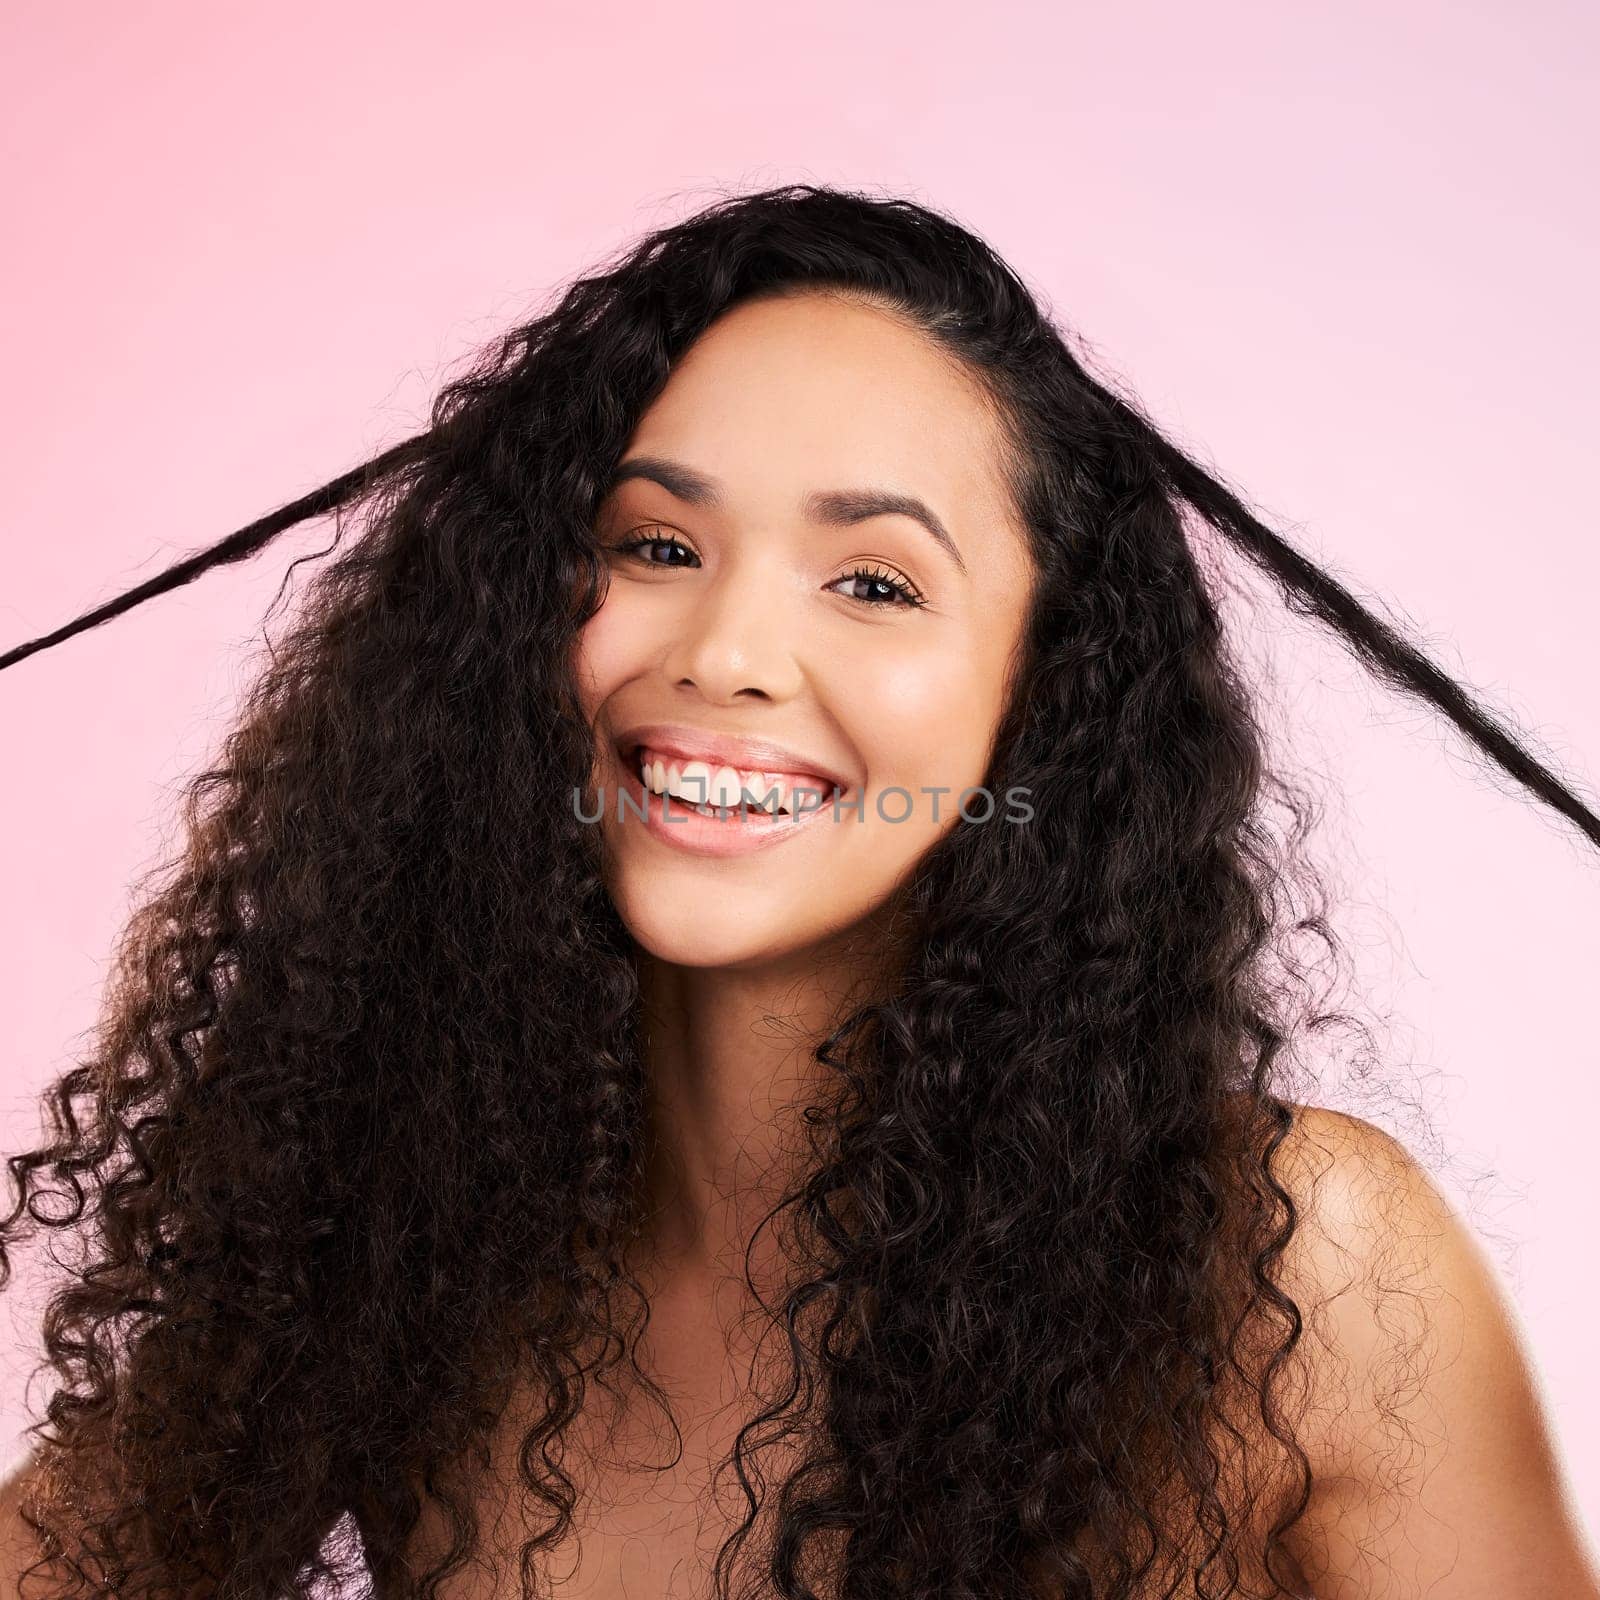 Face, woman and curly hair pull for beauty in studio isolated on a pink background. Portrait, natural cosmetics and hairstyle of happy model in salon treatment for growth, wellness and aesthetic.